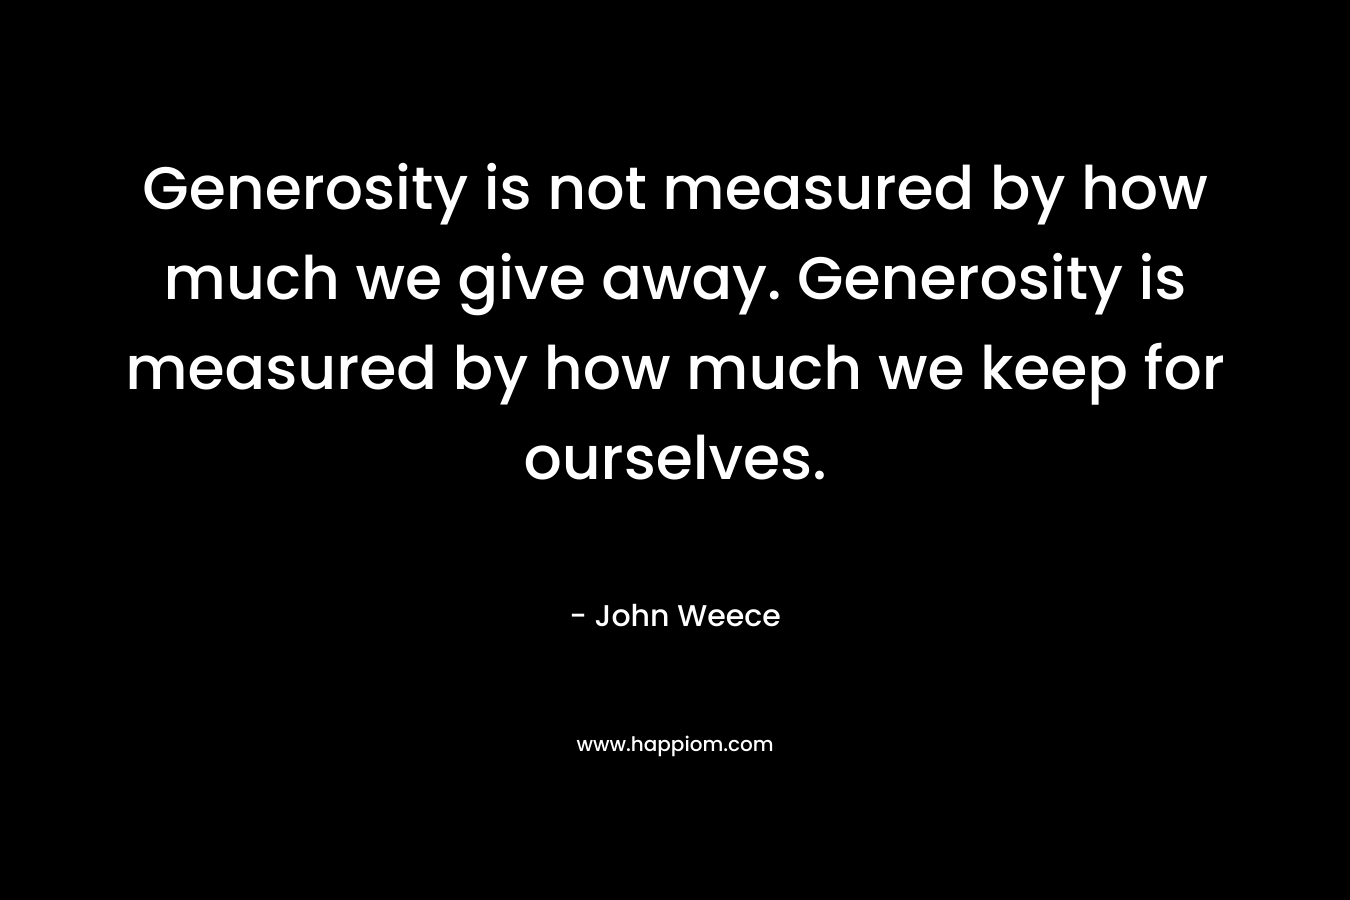 Generosity is not measured by how much we give away. Generosity is measured by how much we keep for ourselves.